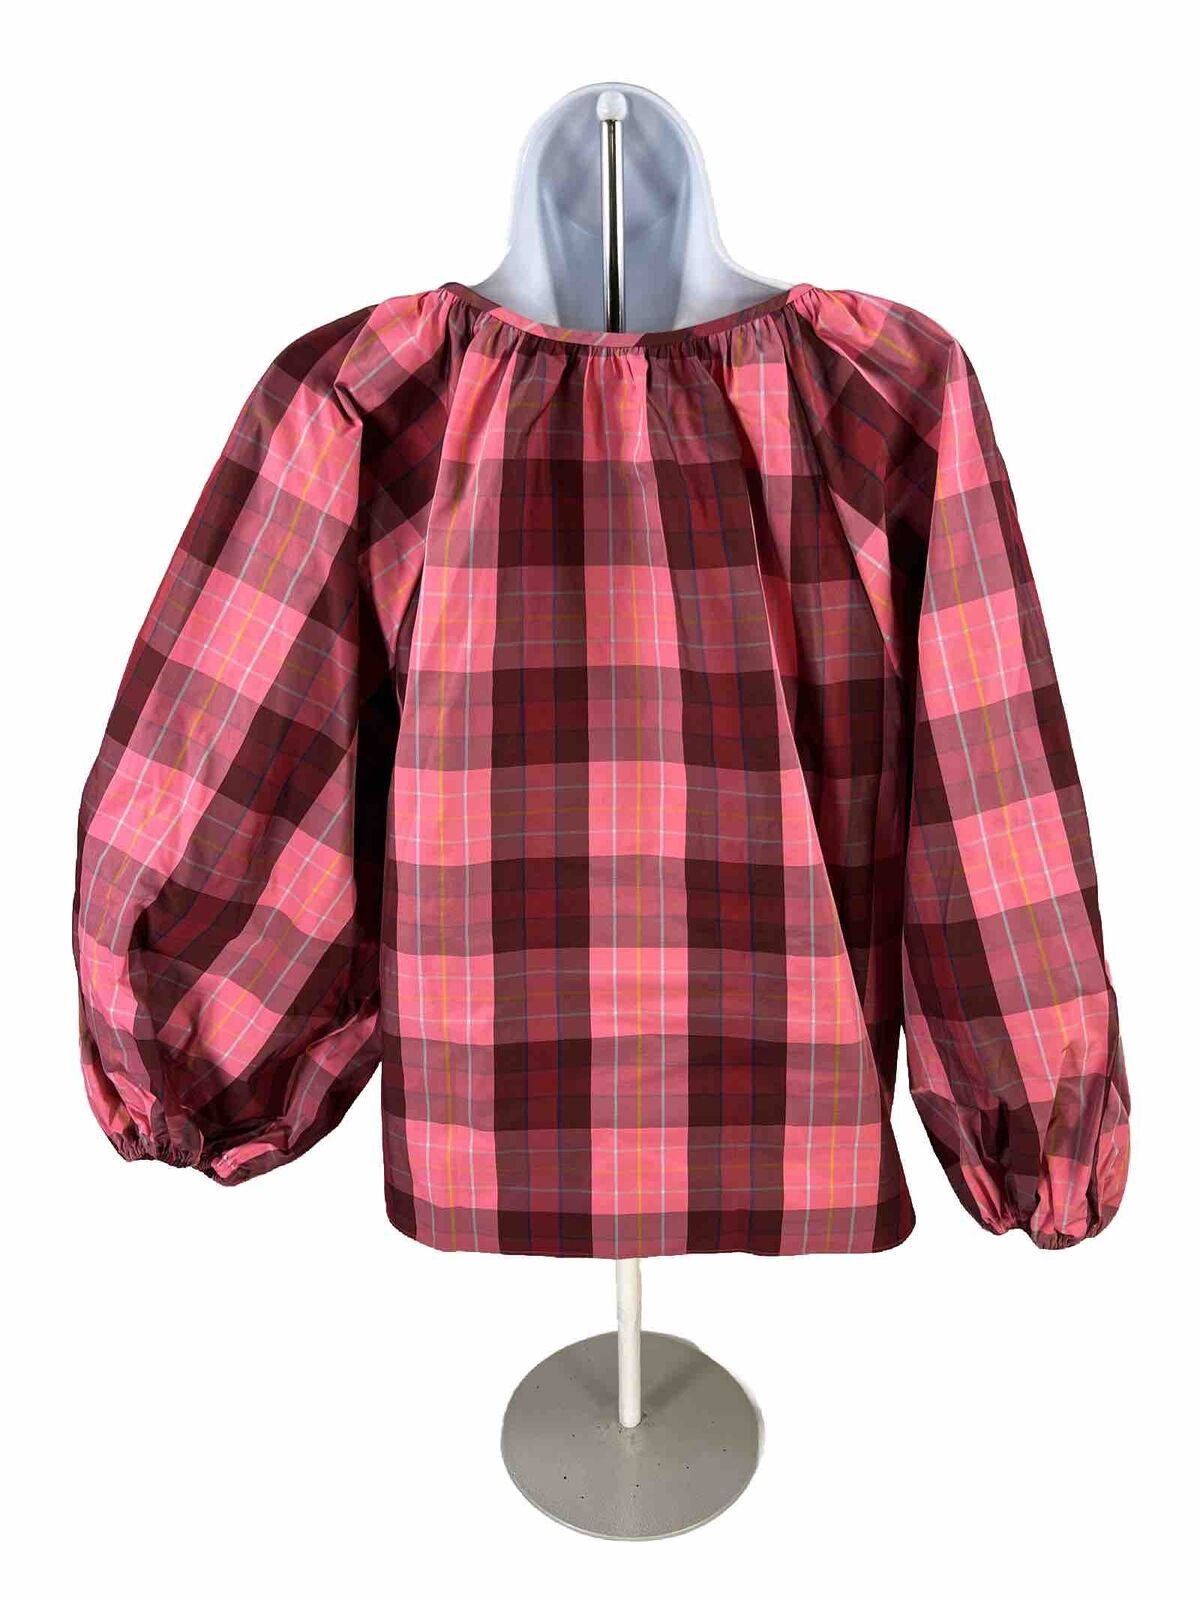 Kate Spade Women's Pink Greenhouse Plaid 3/4 Puff Sleeve Blouse - S